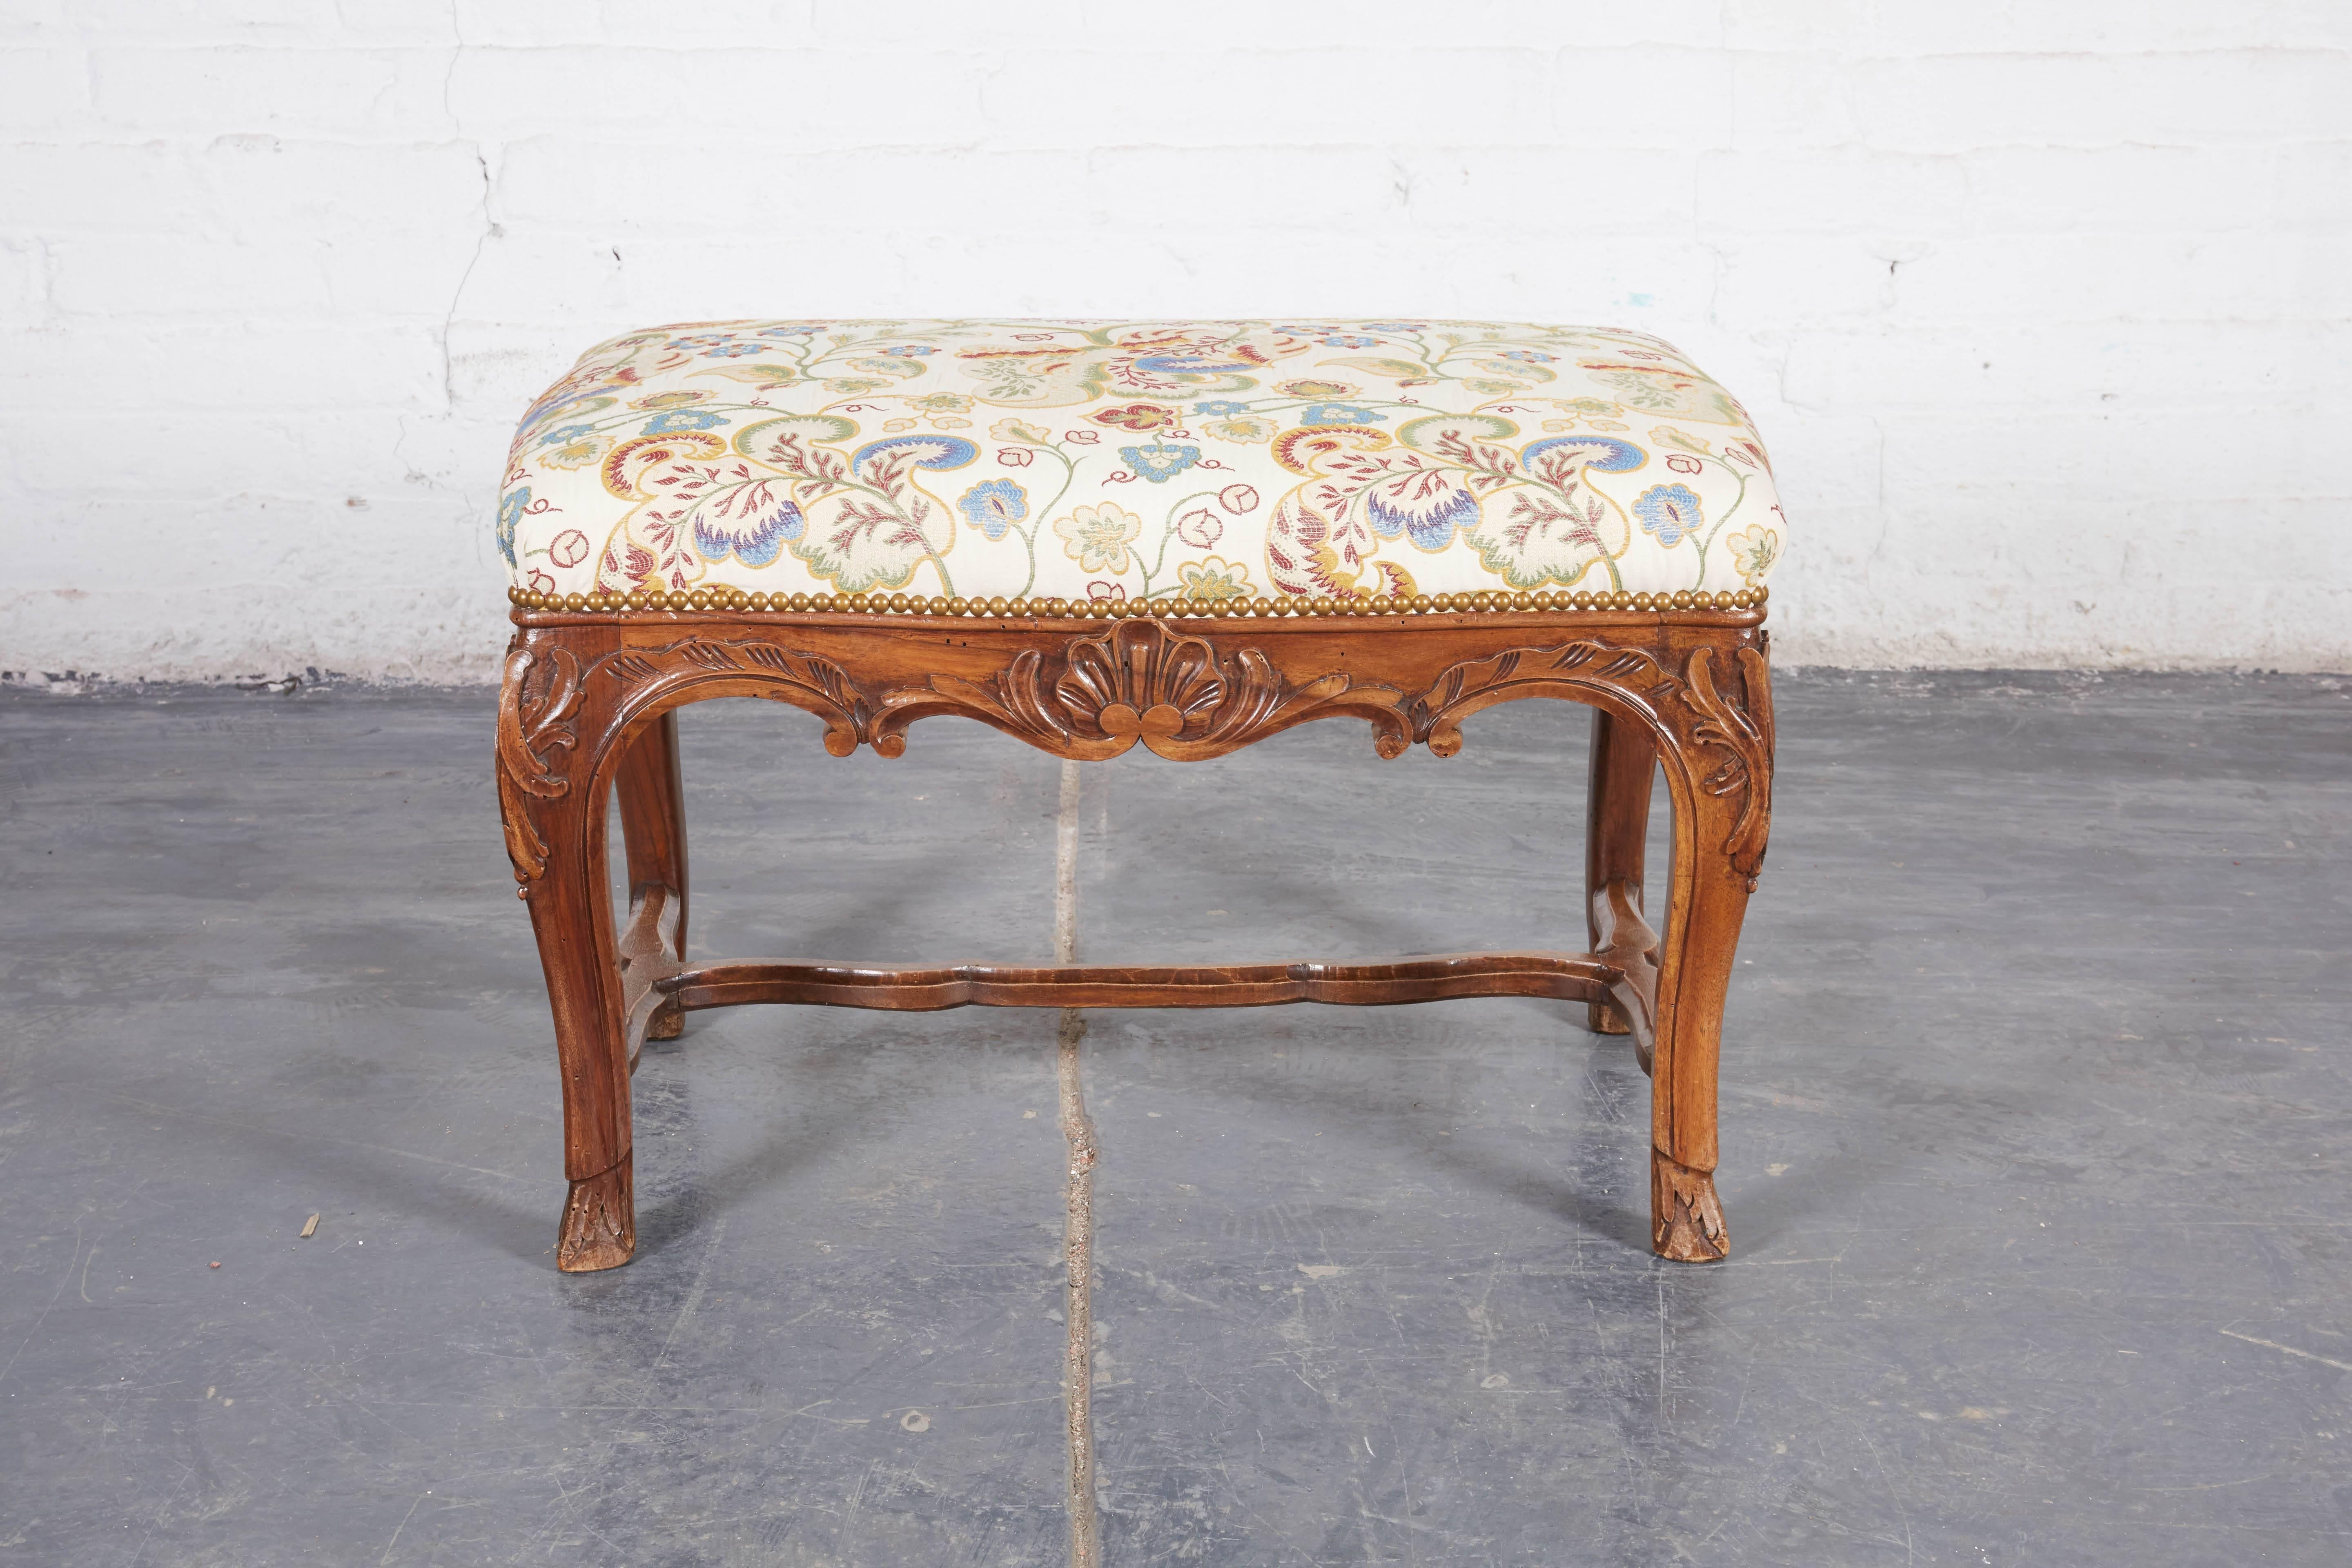 Each newly upholstered in embroidered silk with each side slightly serpentine, over the seat rail centered by shell decoration with foliate decoration to the knees; the cabriole legs joined by stretchers and terminating in pied de biche,